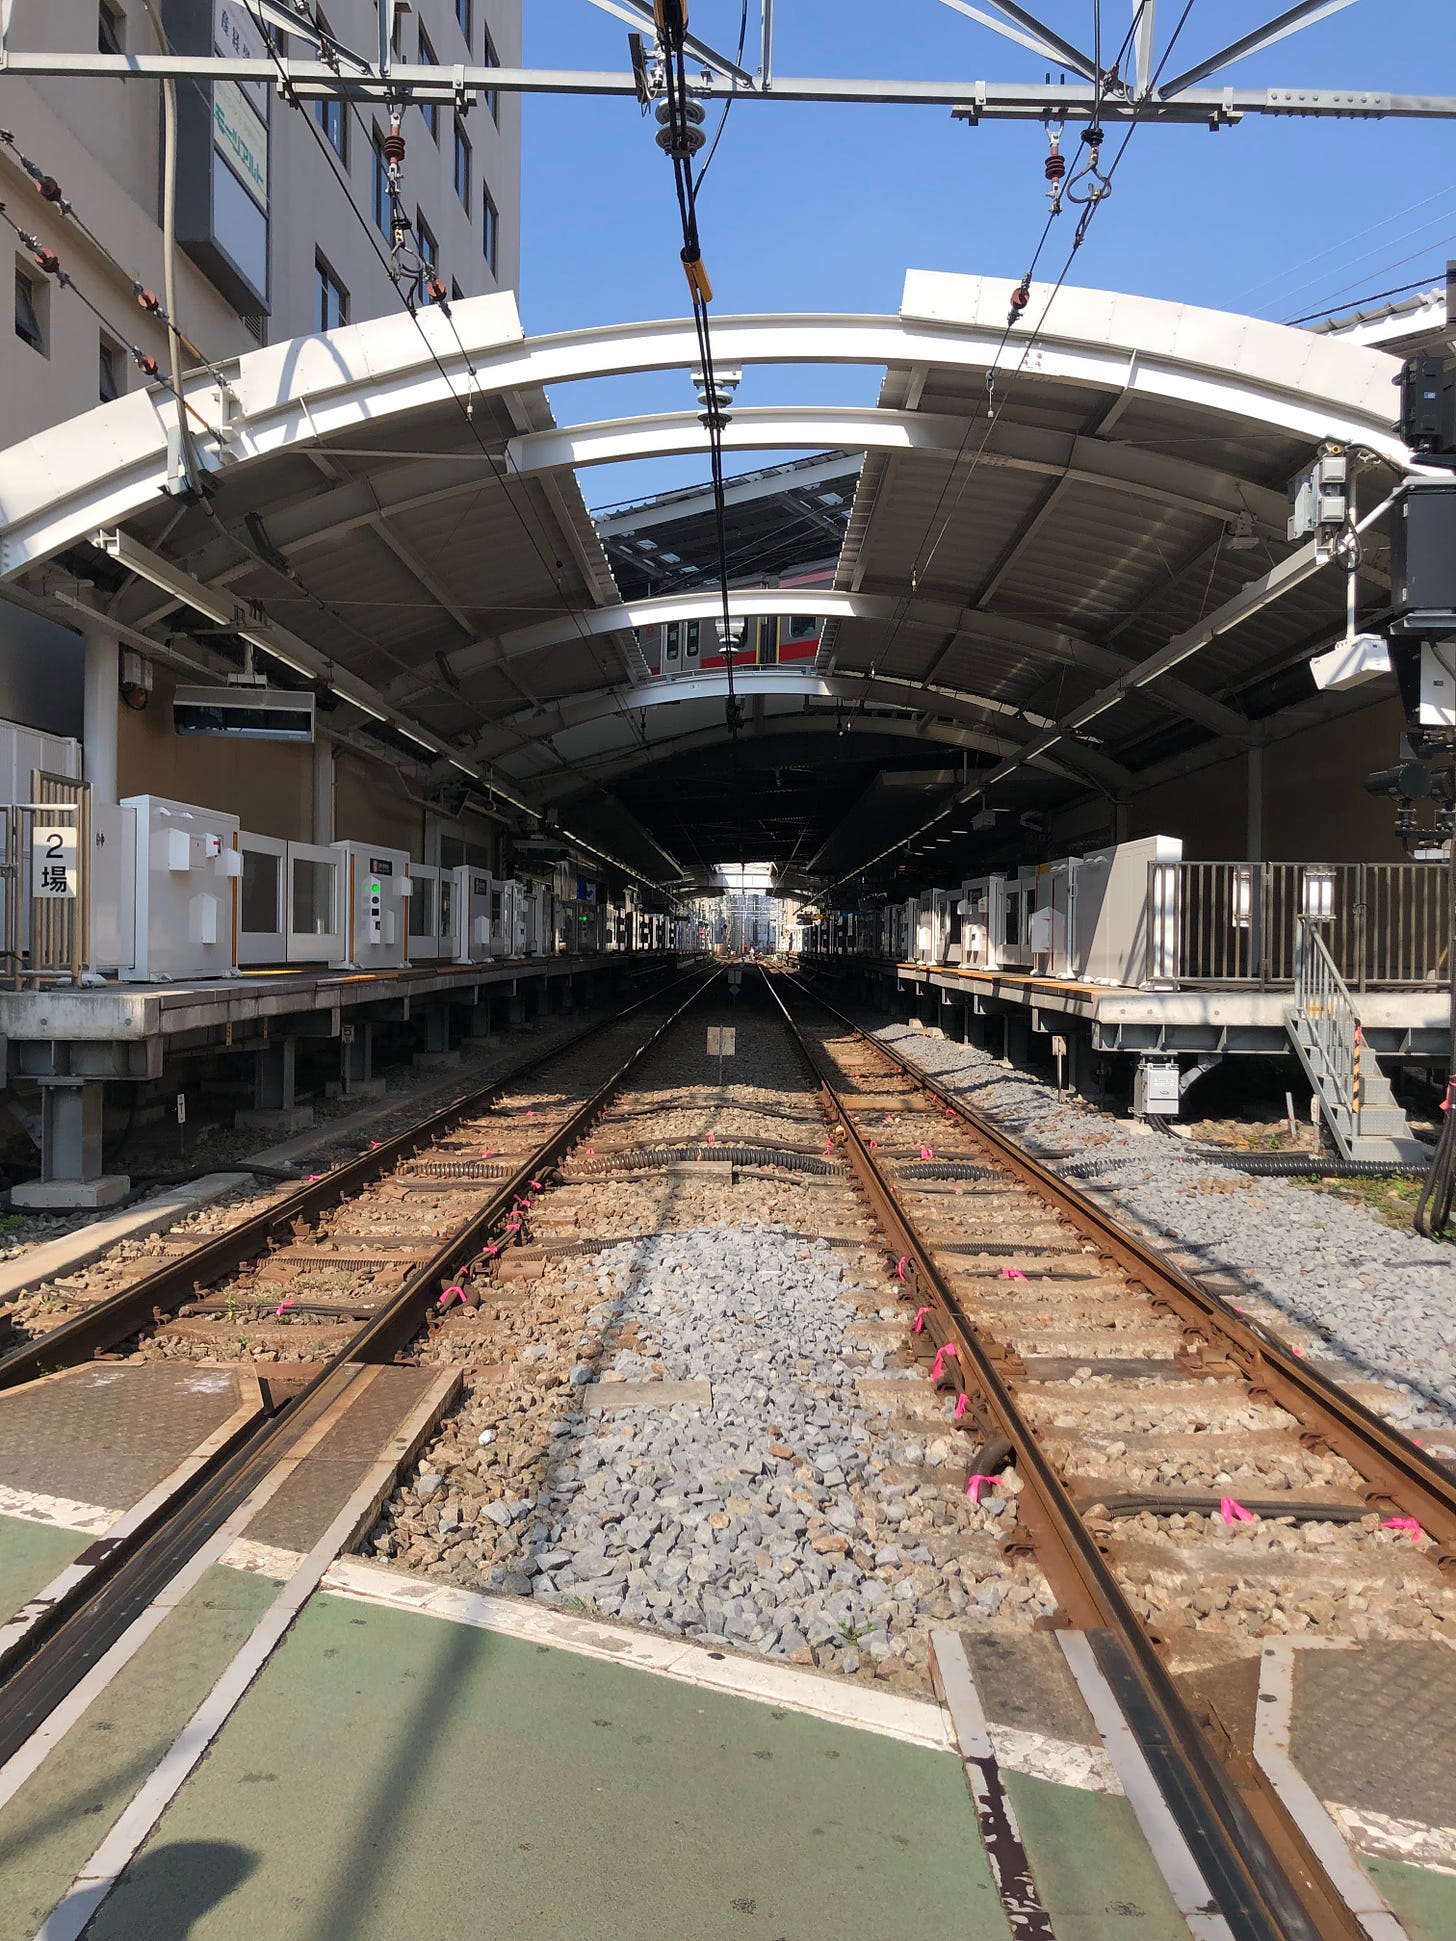 The inside of a train station and the train tracks leading in